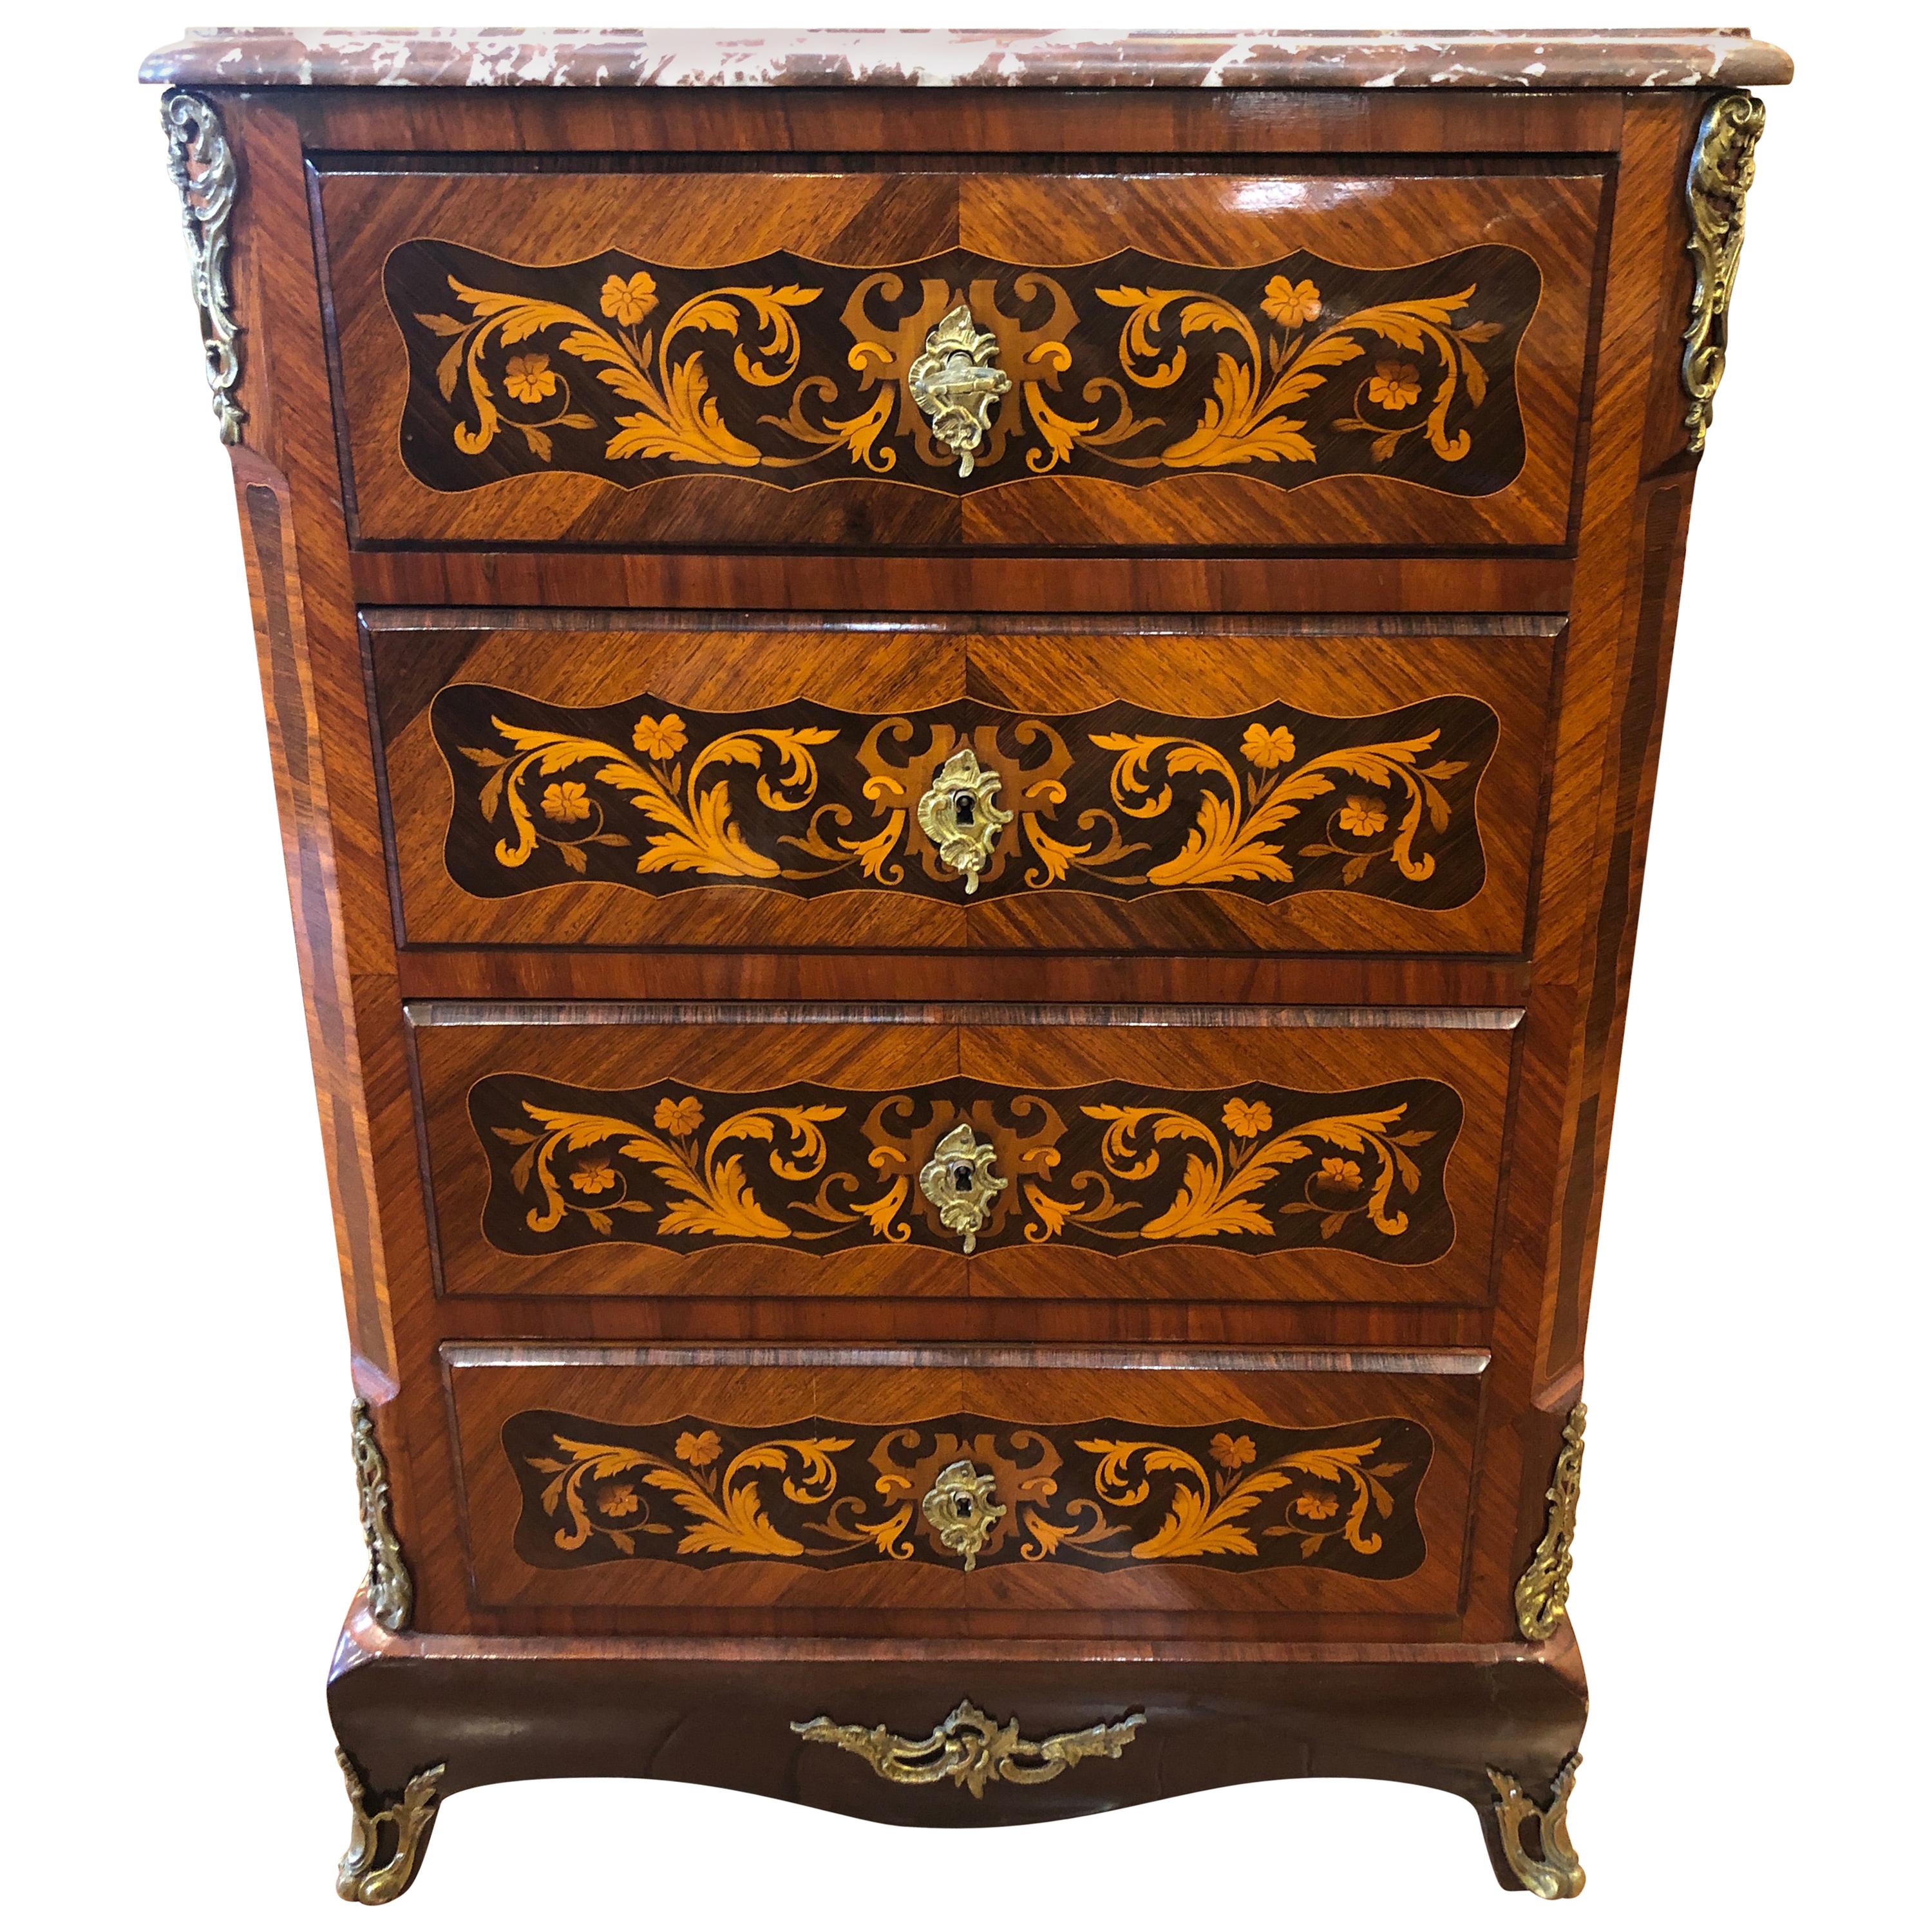 19th Century Napoleon III° France Kingwood Rosewood Inlay Chest of Drawers 1860s